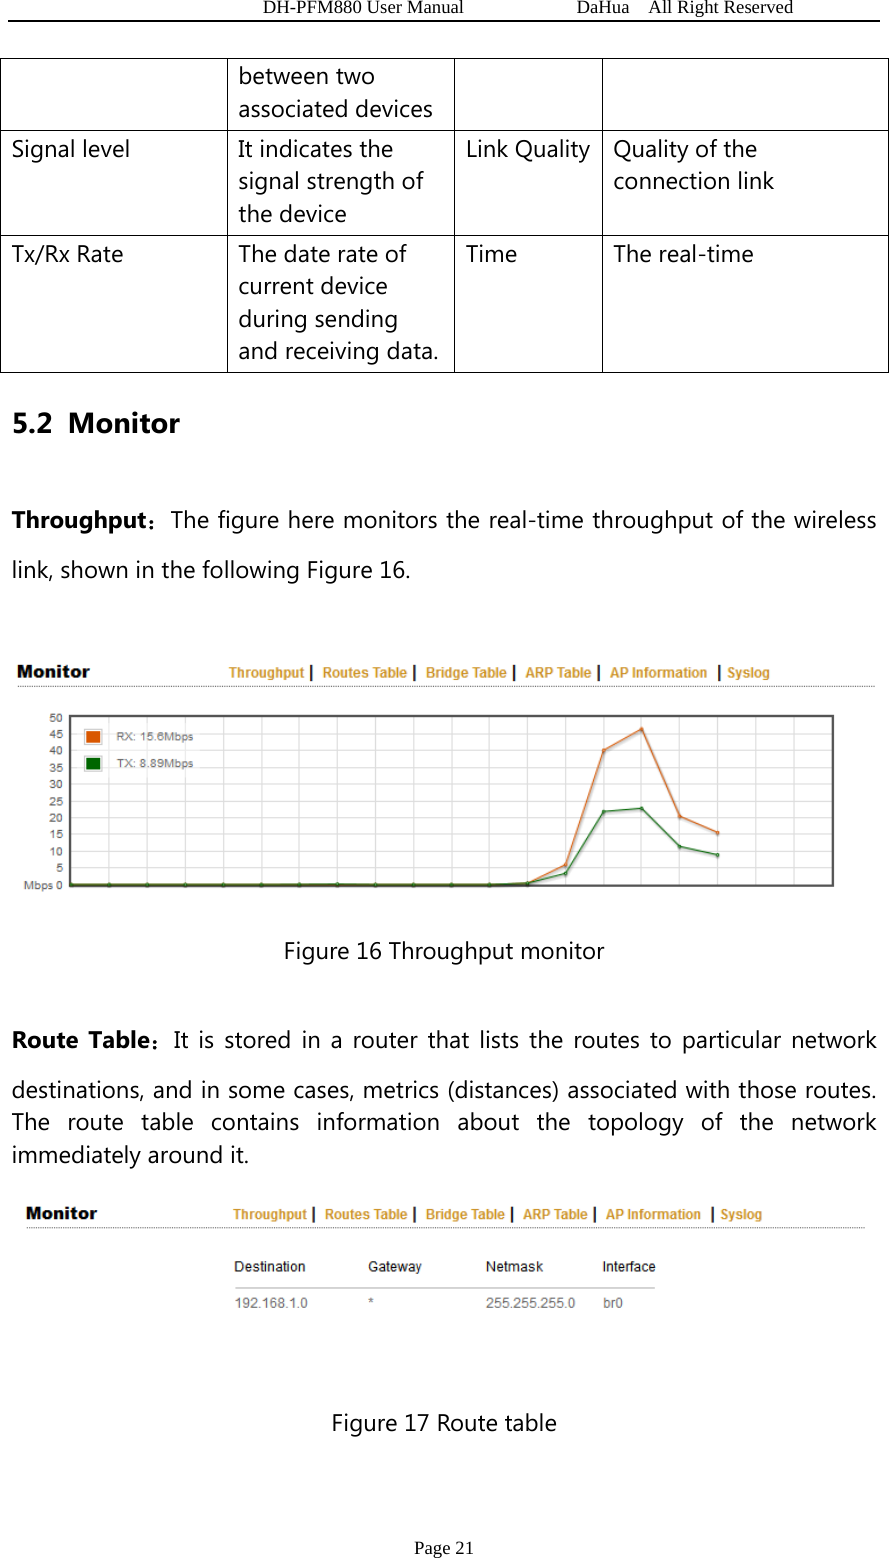   DH-PFM880 User Manual            DaHua  All Right Reserved Page 21 between two associated devices Signal level  It indicates the signal strength of the device Link Quality Quality of the connection link Tx/Rx Rate  The date rate of current device during sending and receiving data.Time The real-time 5.2 Monitor Throughput：The figure here monitors the real-time throughput of the wireless link, shown in the following Figure 16.   Figure 16 Throughput monitor Route Table：It is stored in a router that lists the routes to particular network destinations, and in some cases, metrics (distances) associated with those routes. The route table contains information about the topology of the network immediately around it.  Figure 17 Route table 